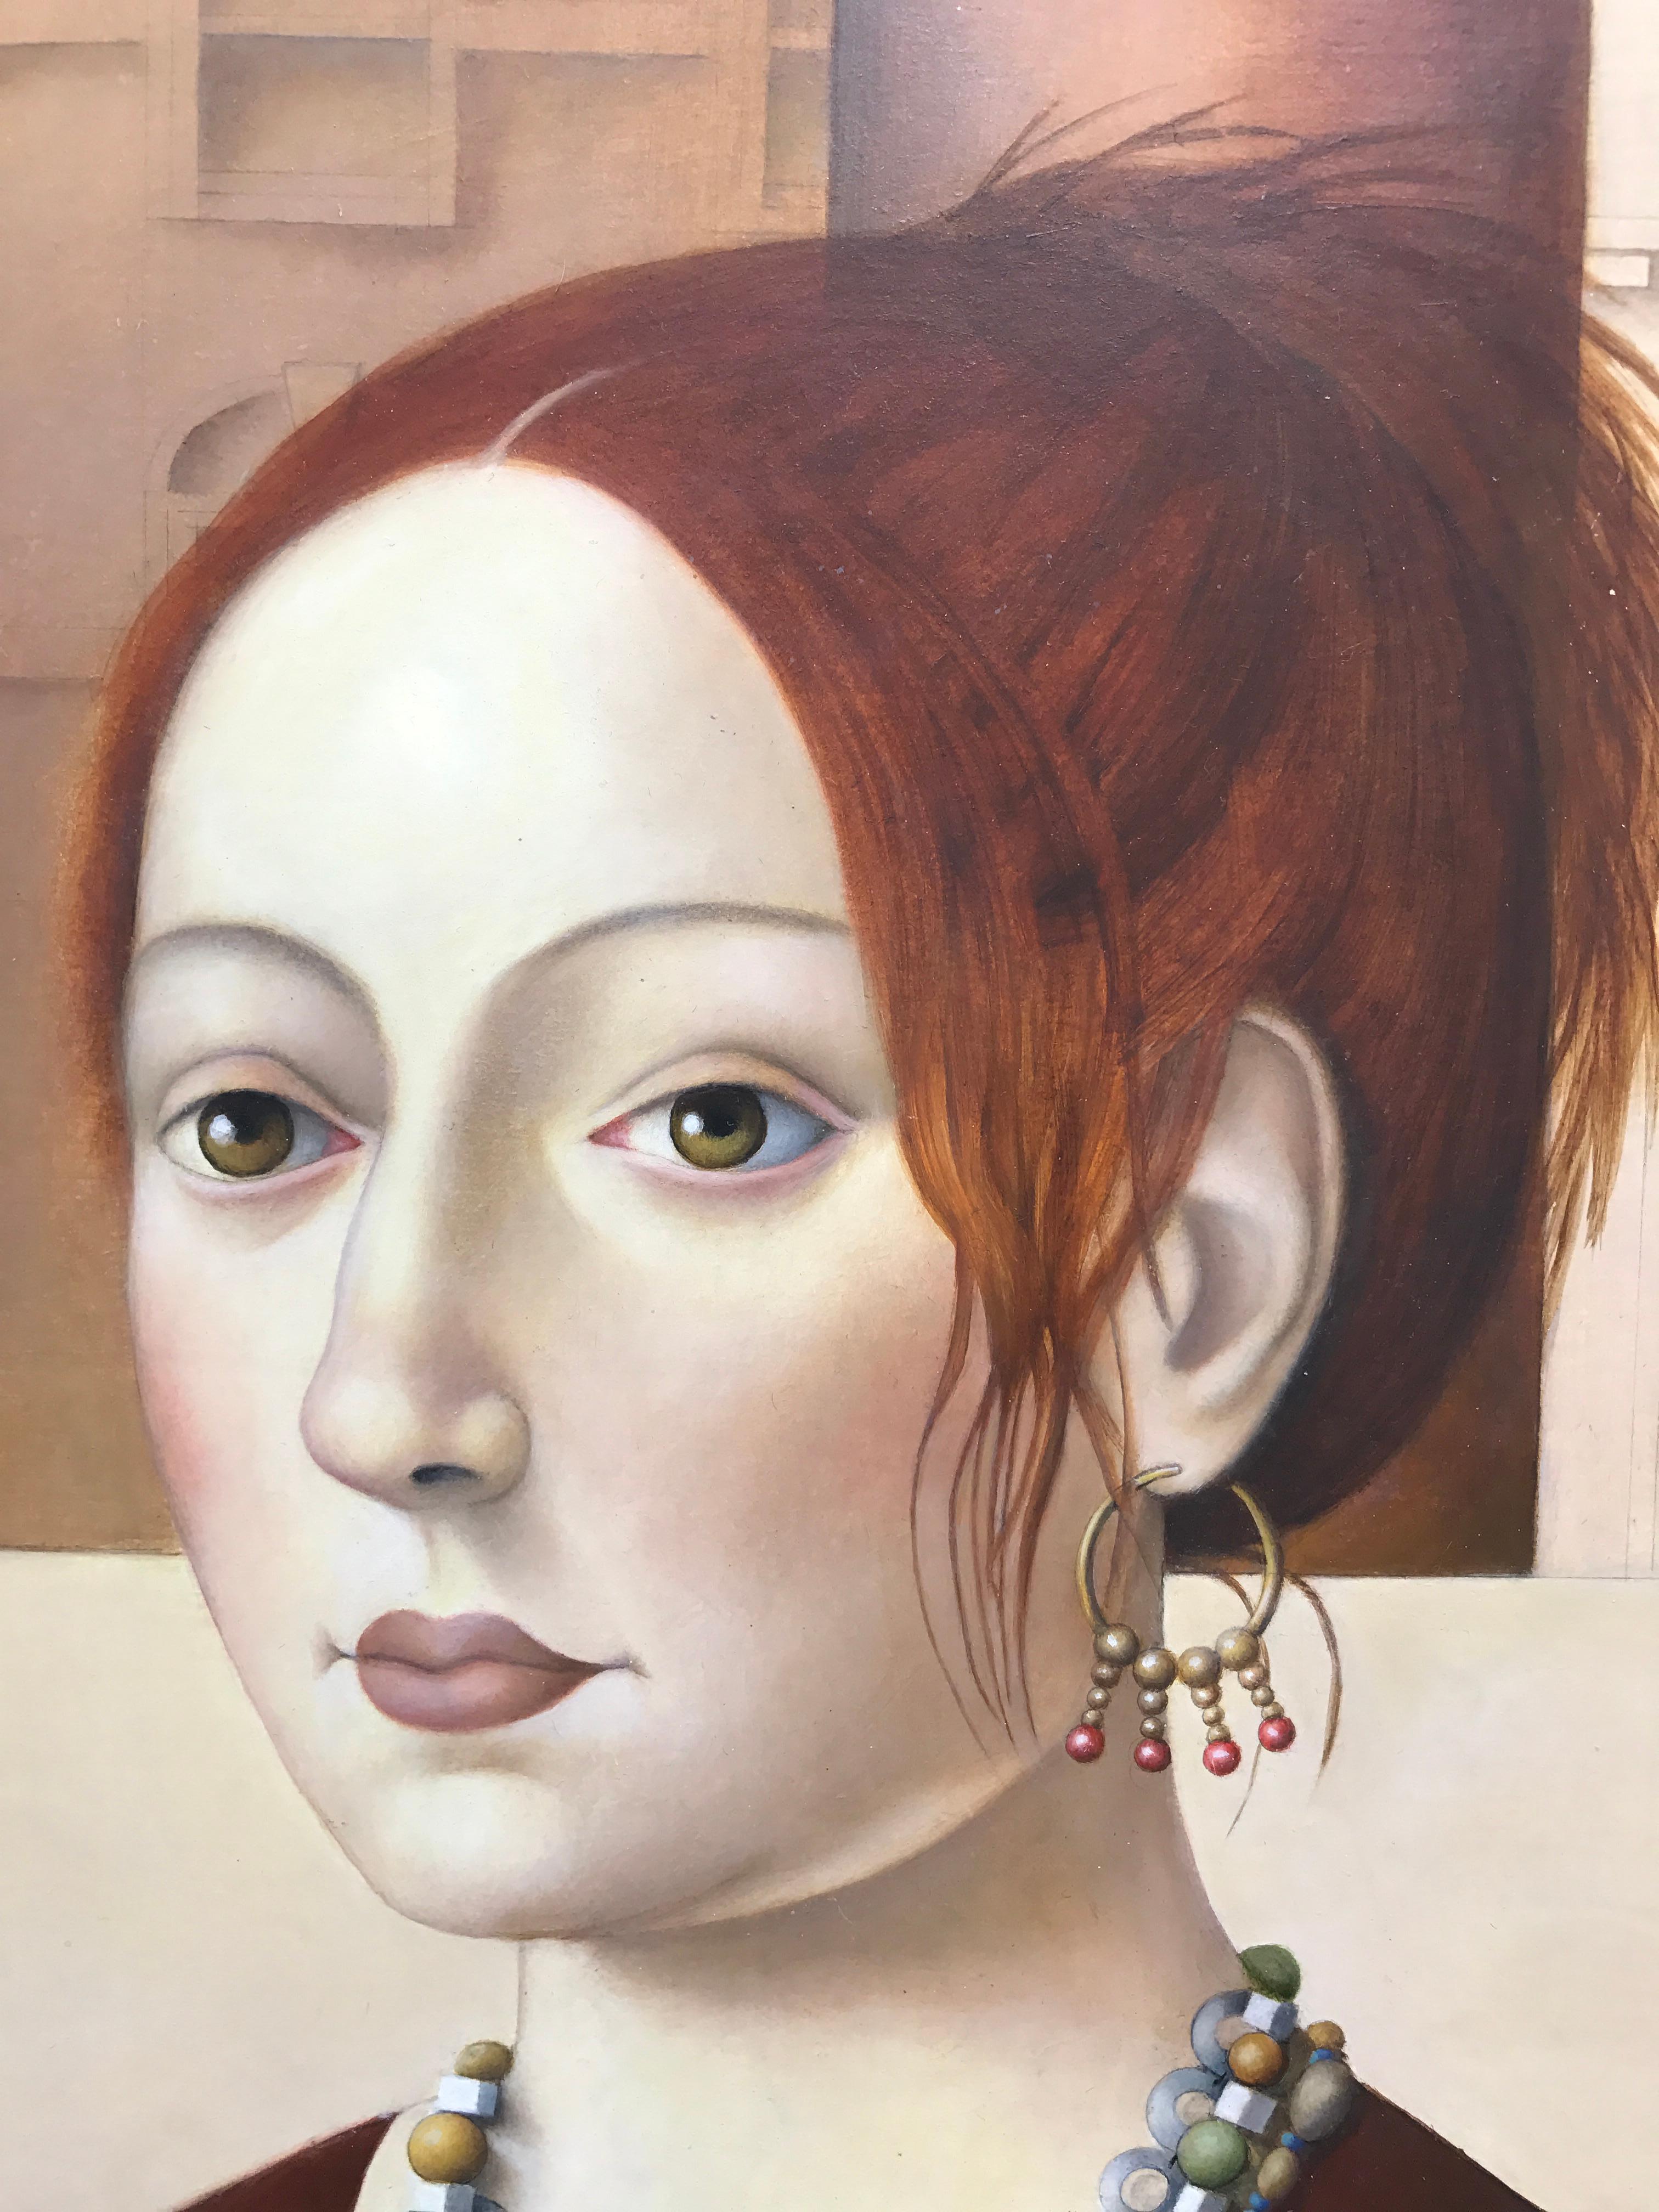 This is an original oil painting by the New York artist, Amy Hill, which juxtaposes modern fashion with Flemish Renaissance style of portraiture.  It is oil on wood panel, 20